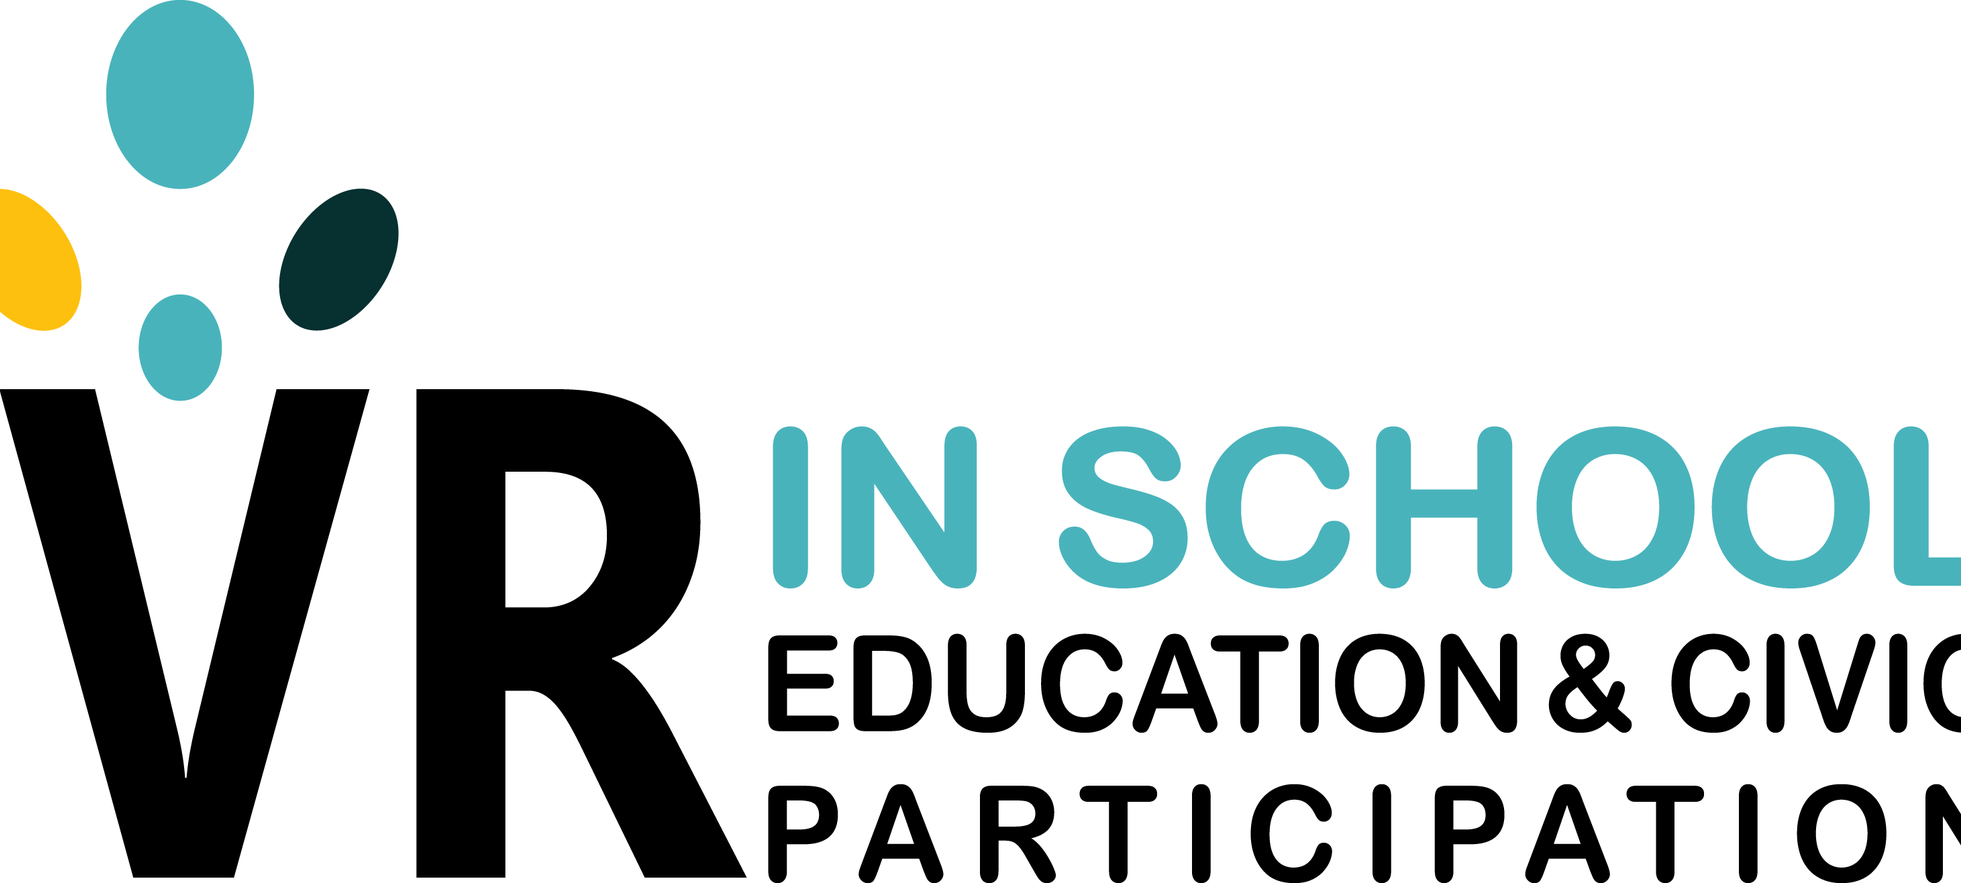 VR in School Education & Civic Participation